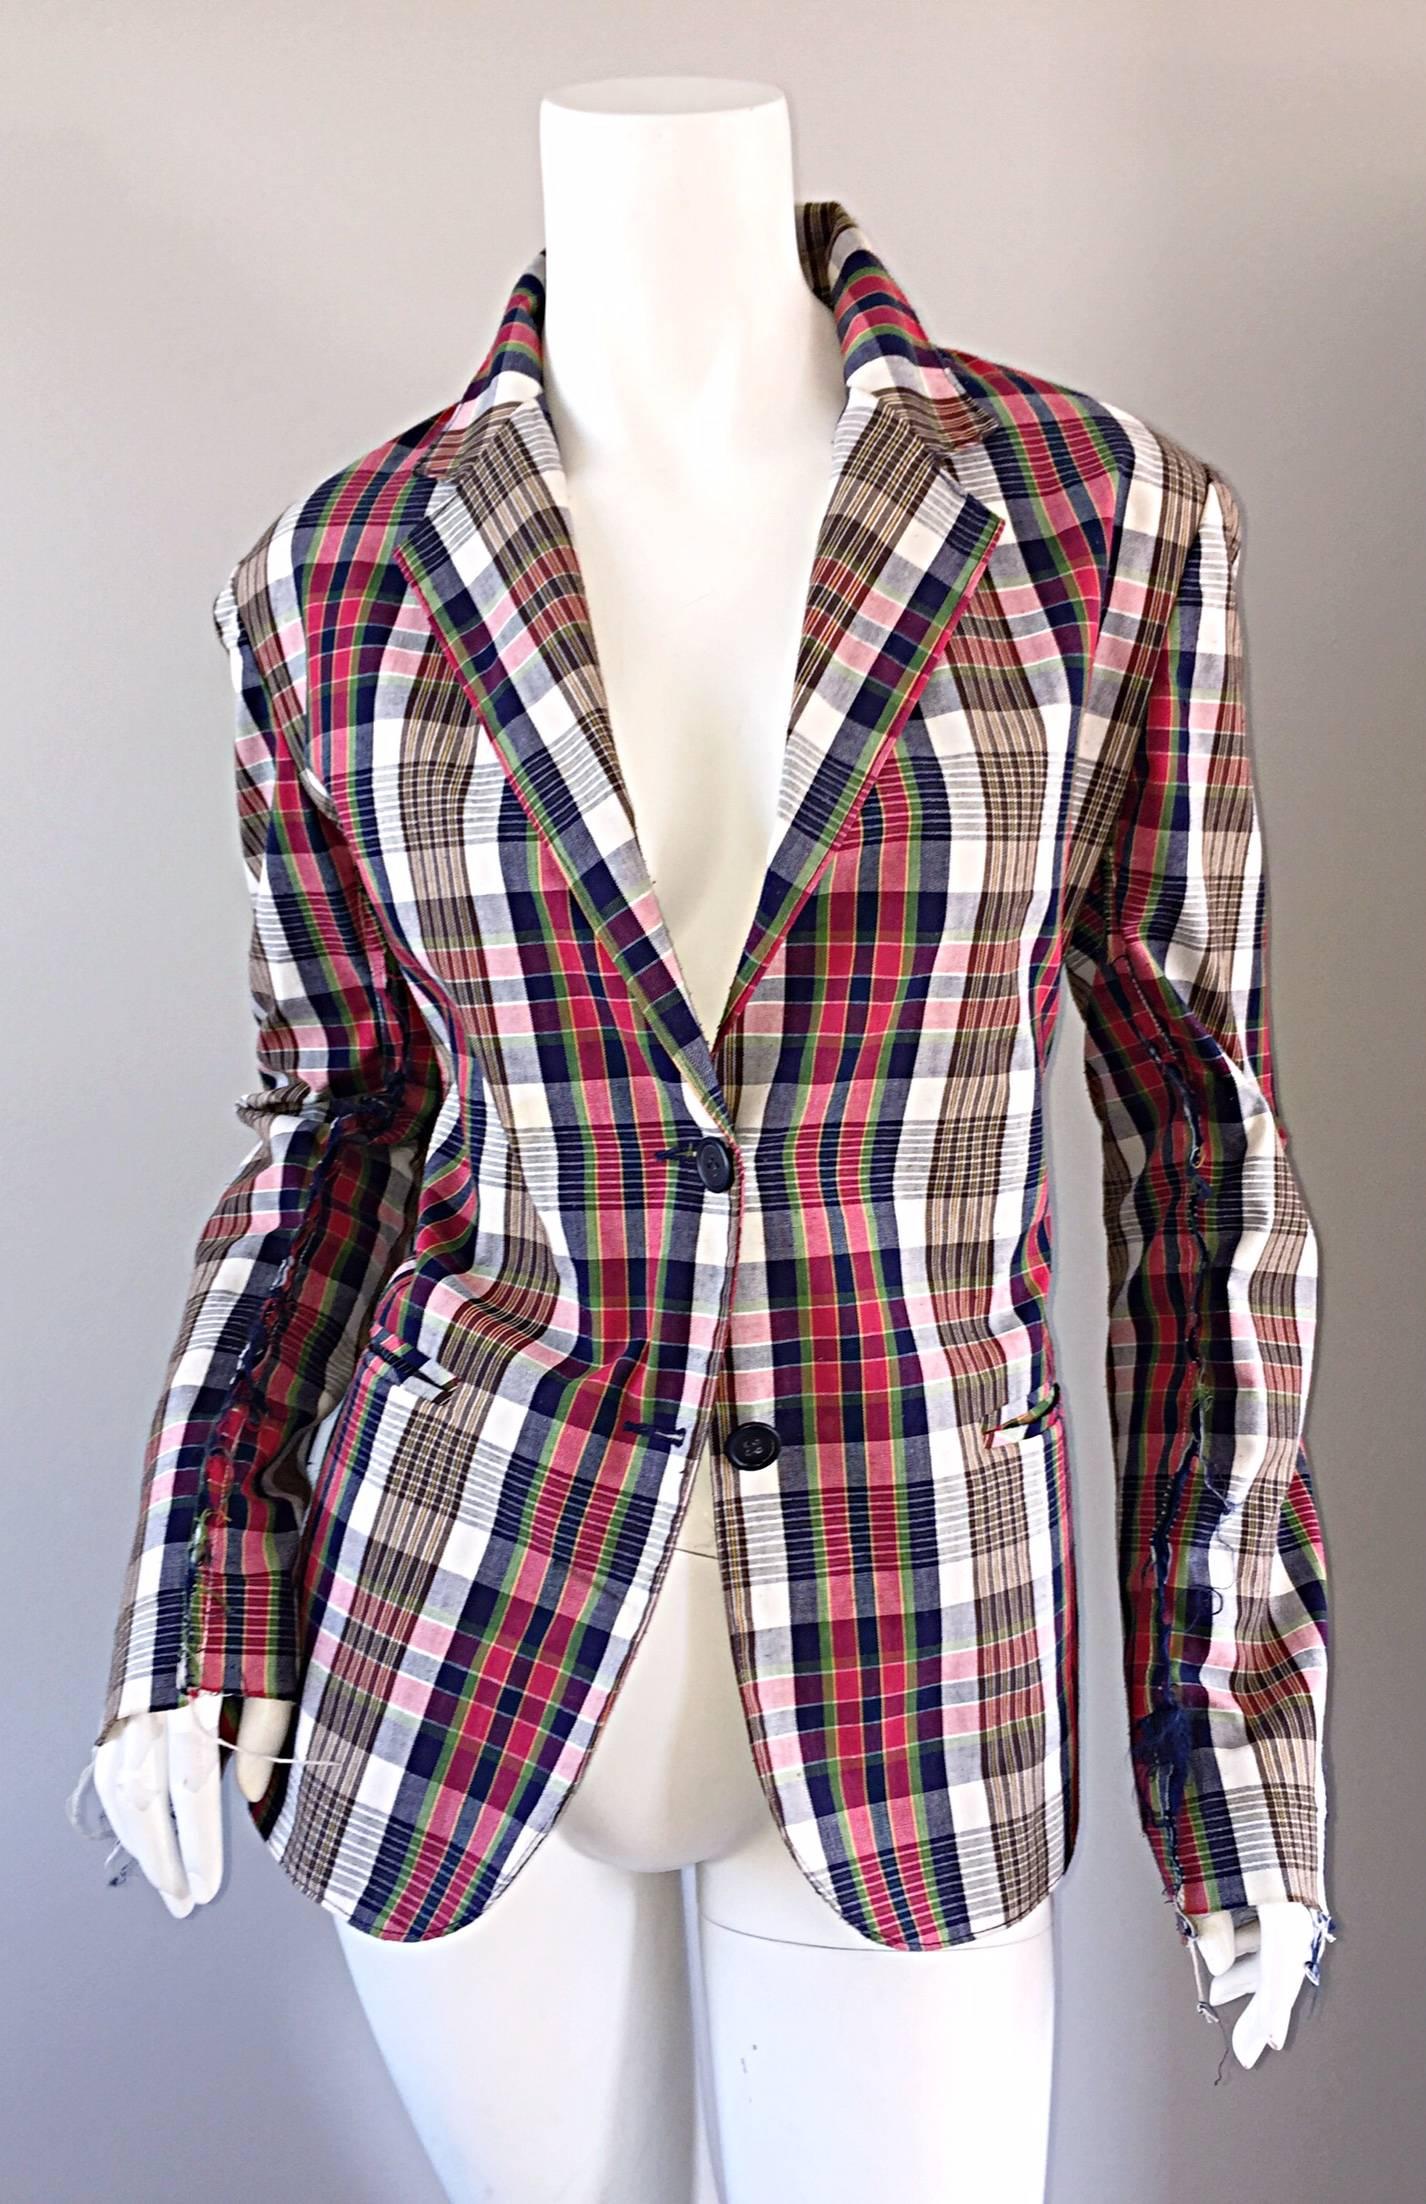 Libertine Impossible to Find Up - Cycled Plaid Blazer w/ Hand - Painted Skull 3